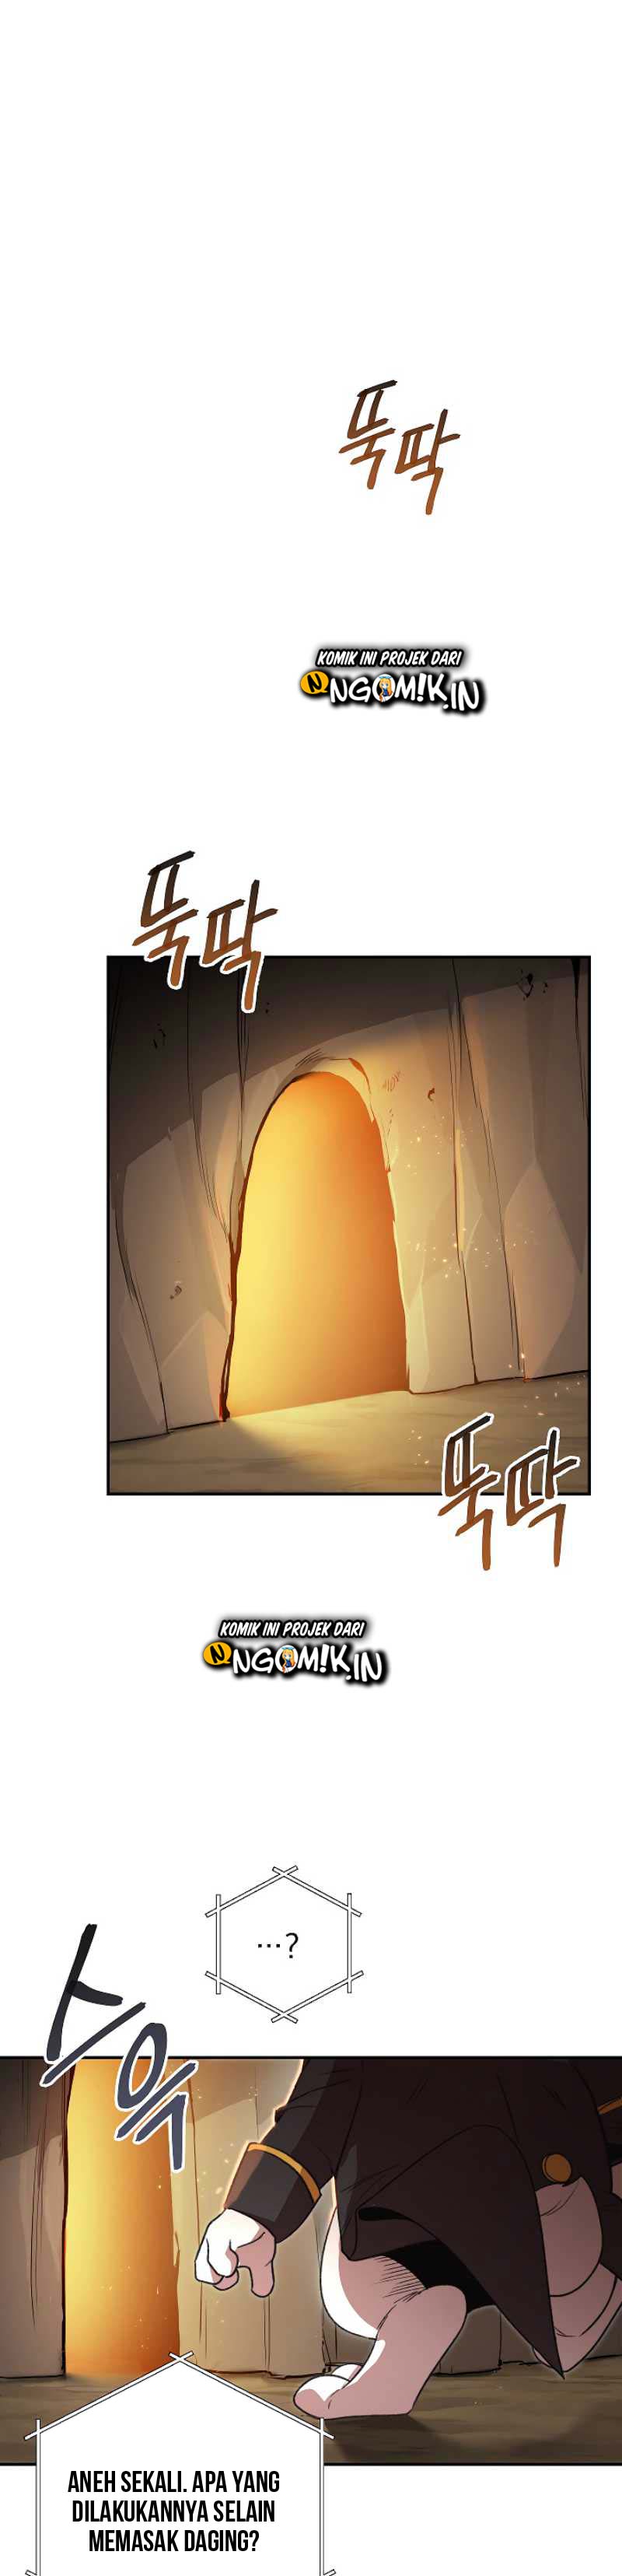 Dungeon Reset Chapter 12